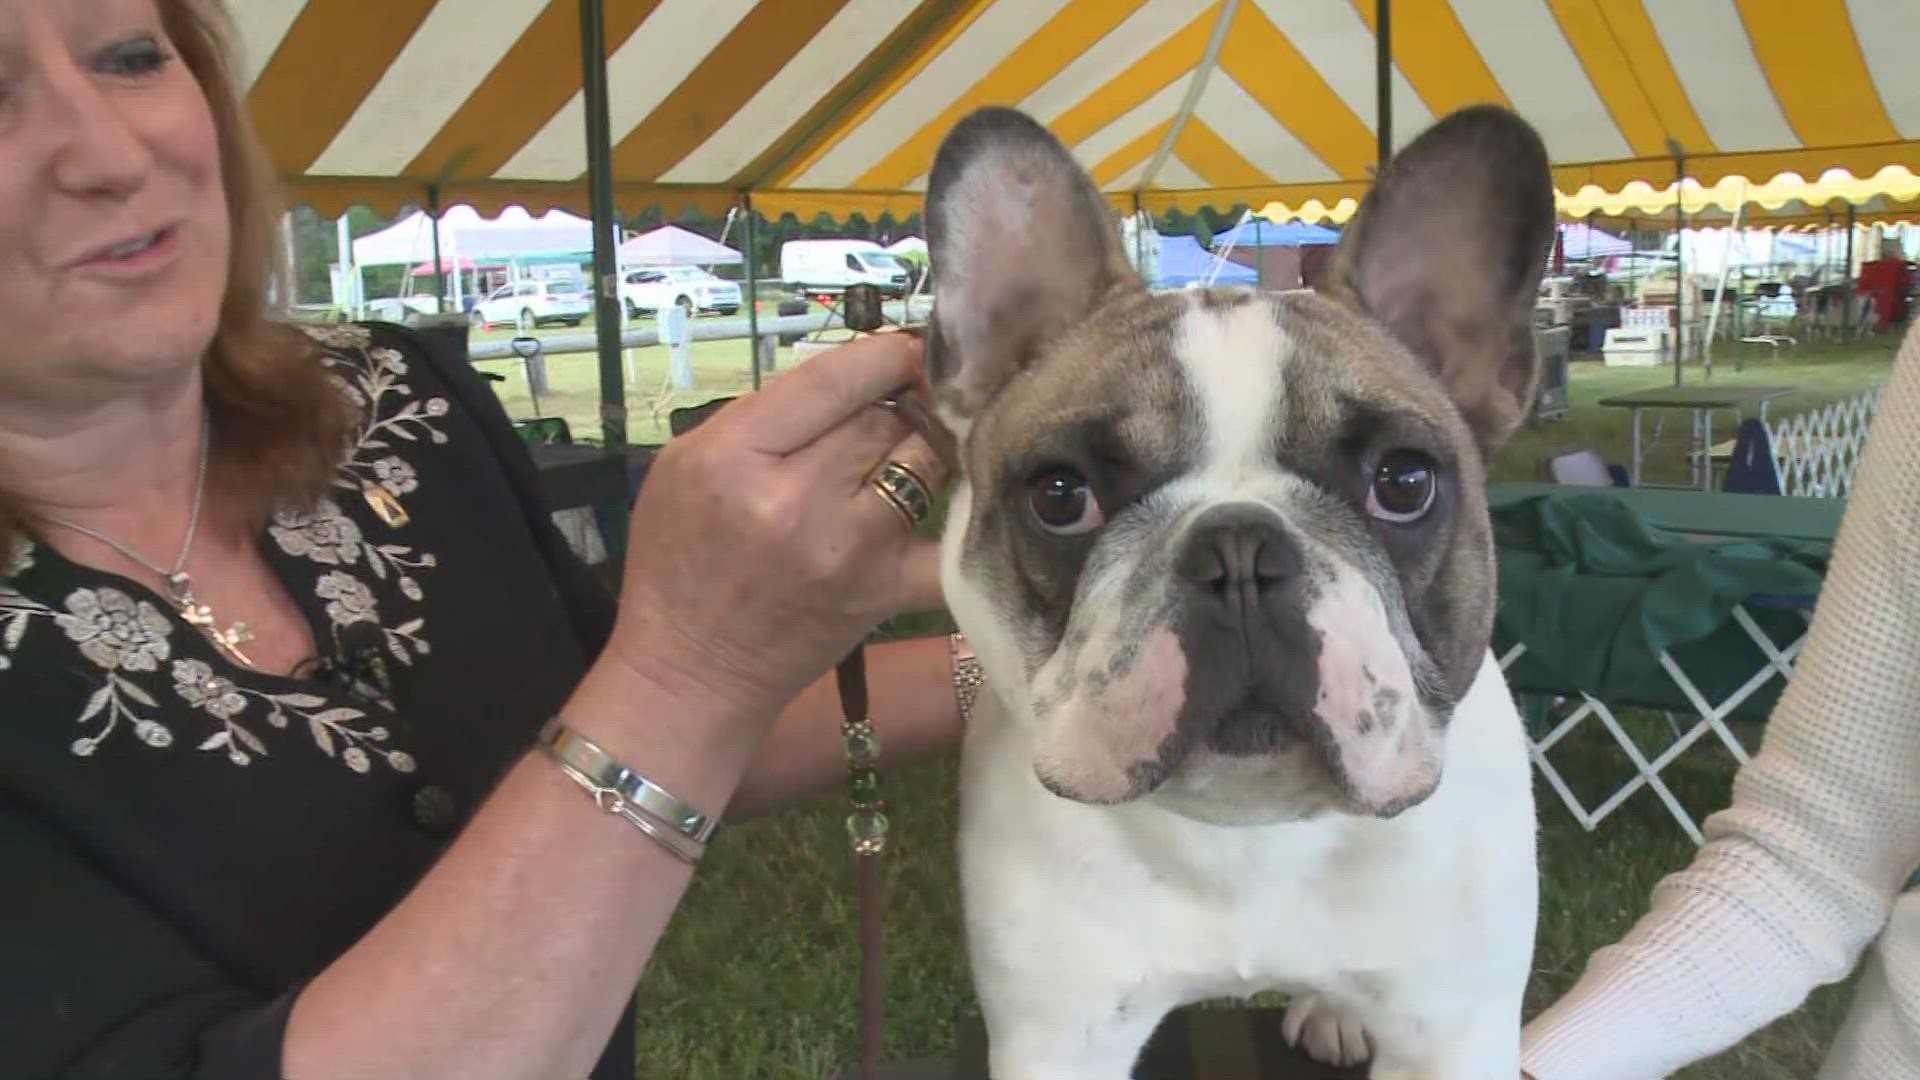 The Chickadee Classic Dog Show has more than 3,000 of the best dogs in the US and Canada vying for best of breed and other categories. The event is free.